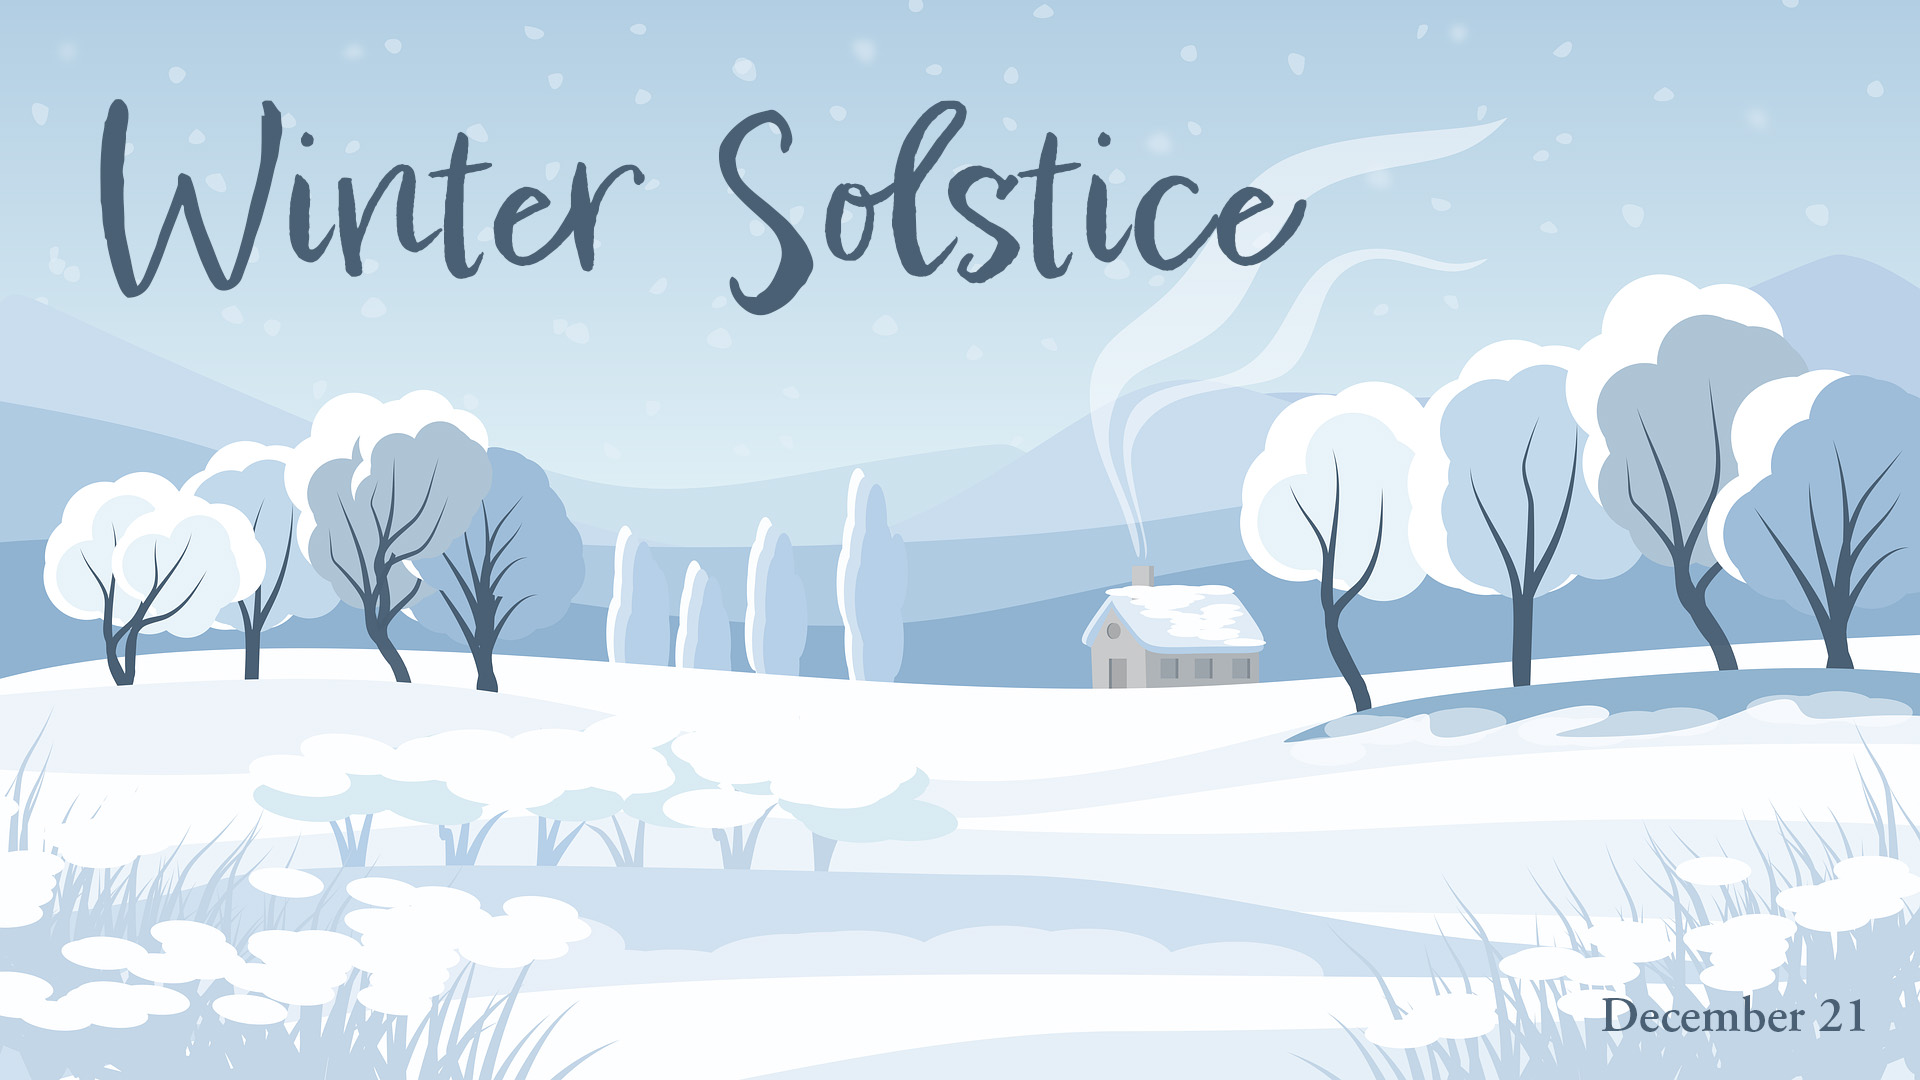 Light blue illustrated winter scape of trees, a house and a frozen over lake. Winter Solstice is written in a grungy font across the top left of the graphic.